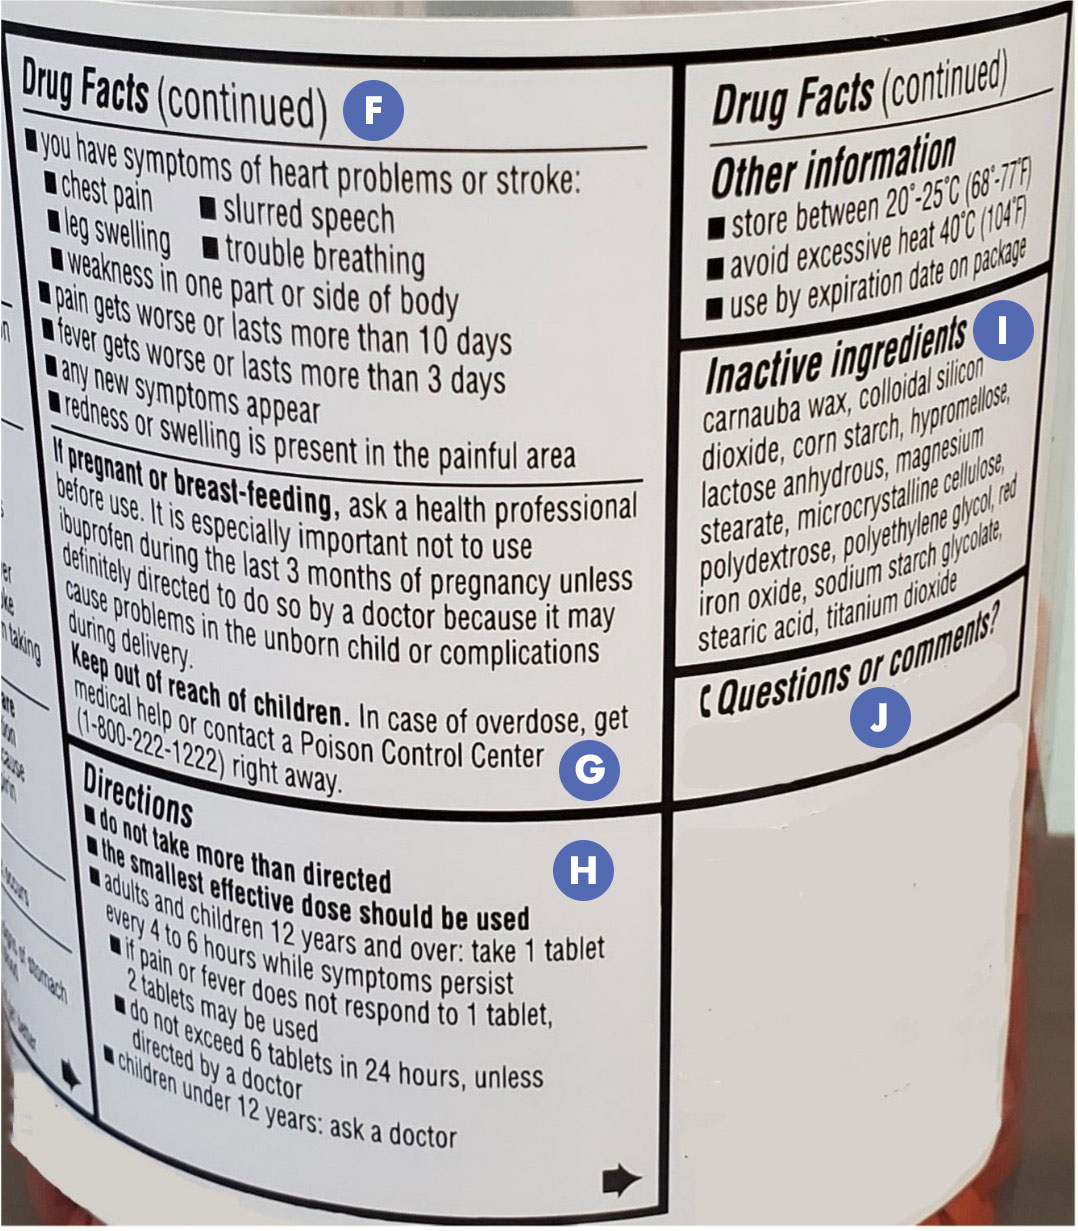 Example of the second part of a medication label with drug facts such as side effects, directions, and inactive ingredients.